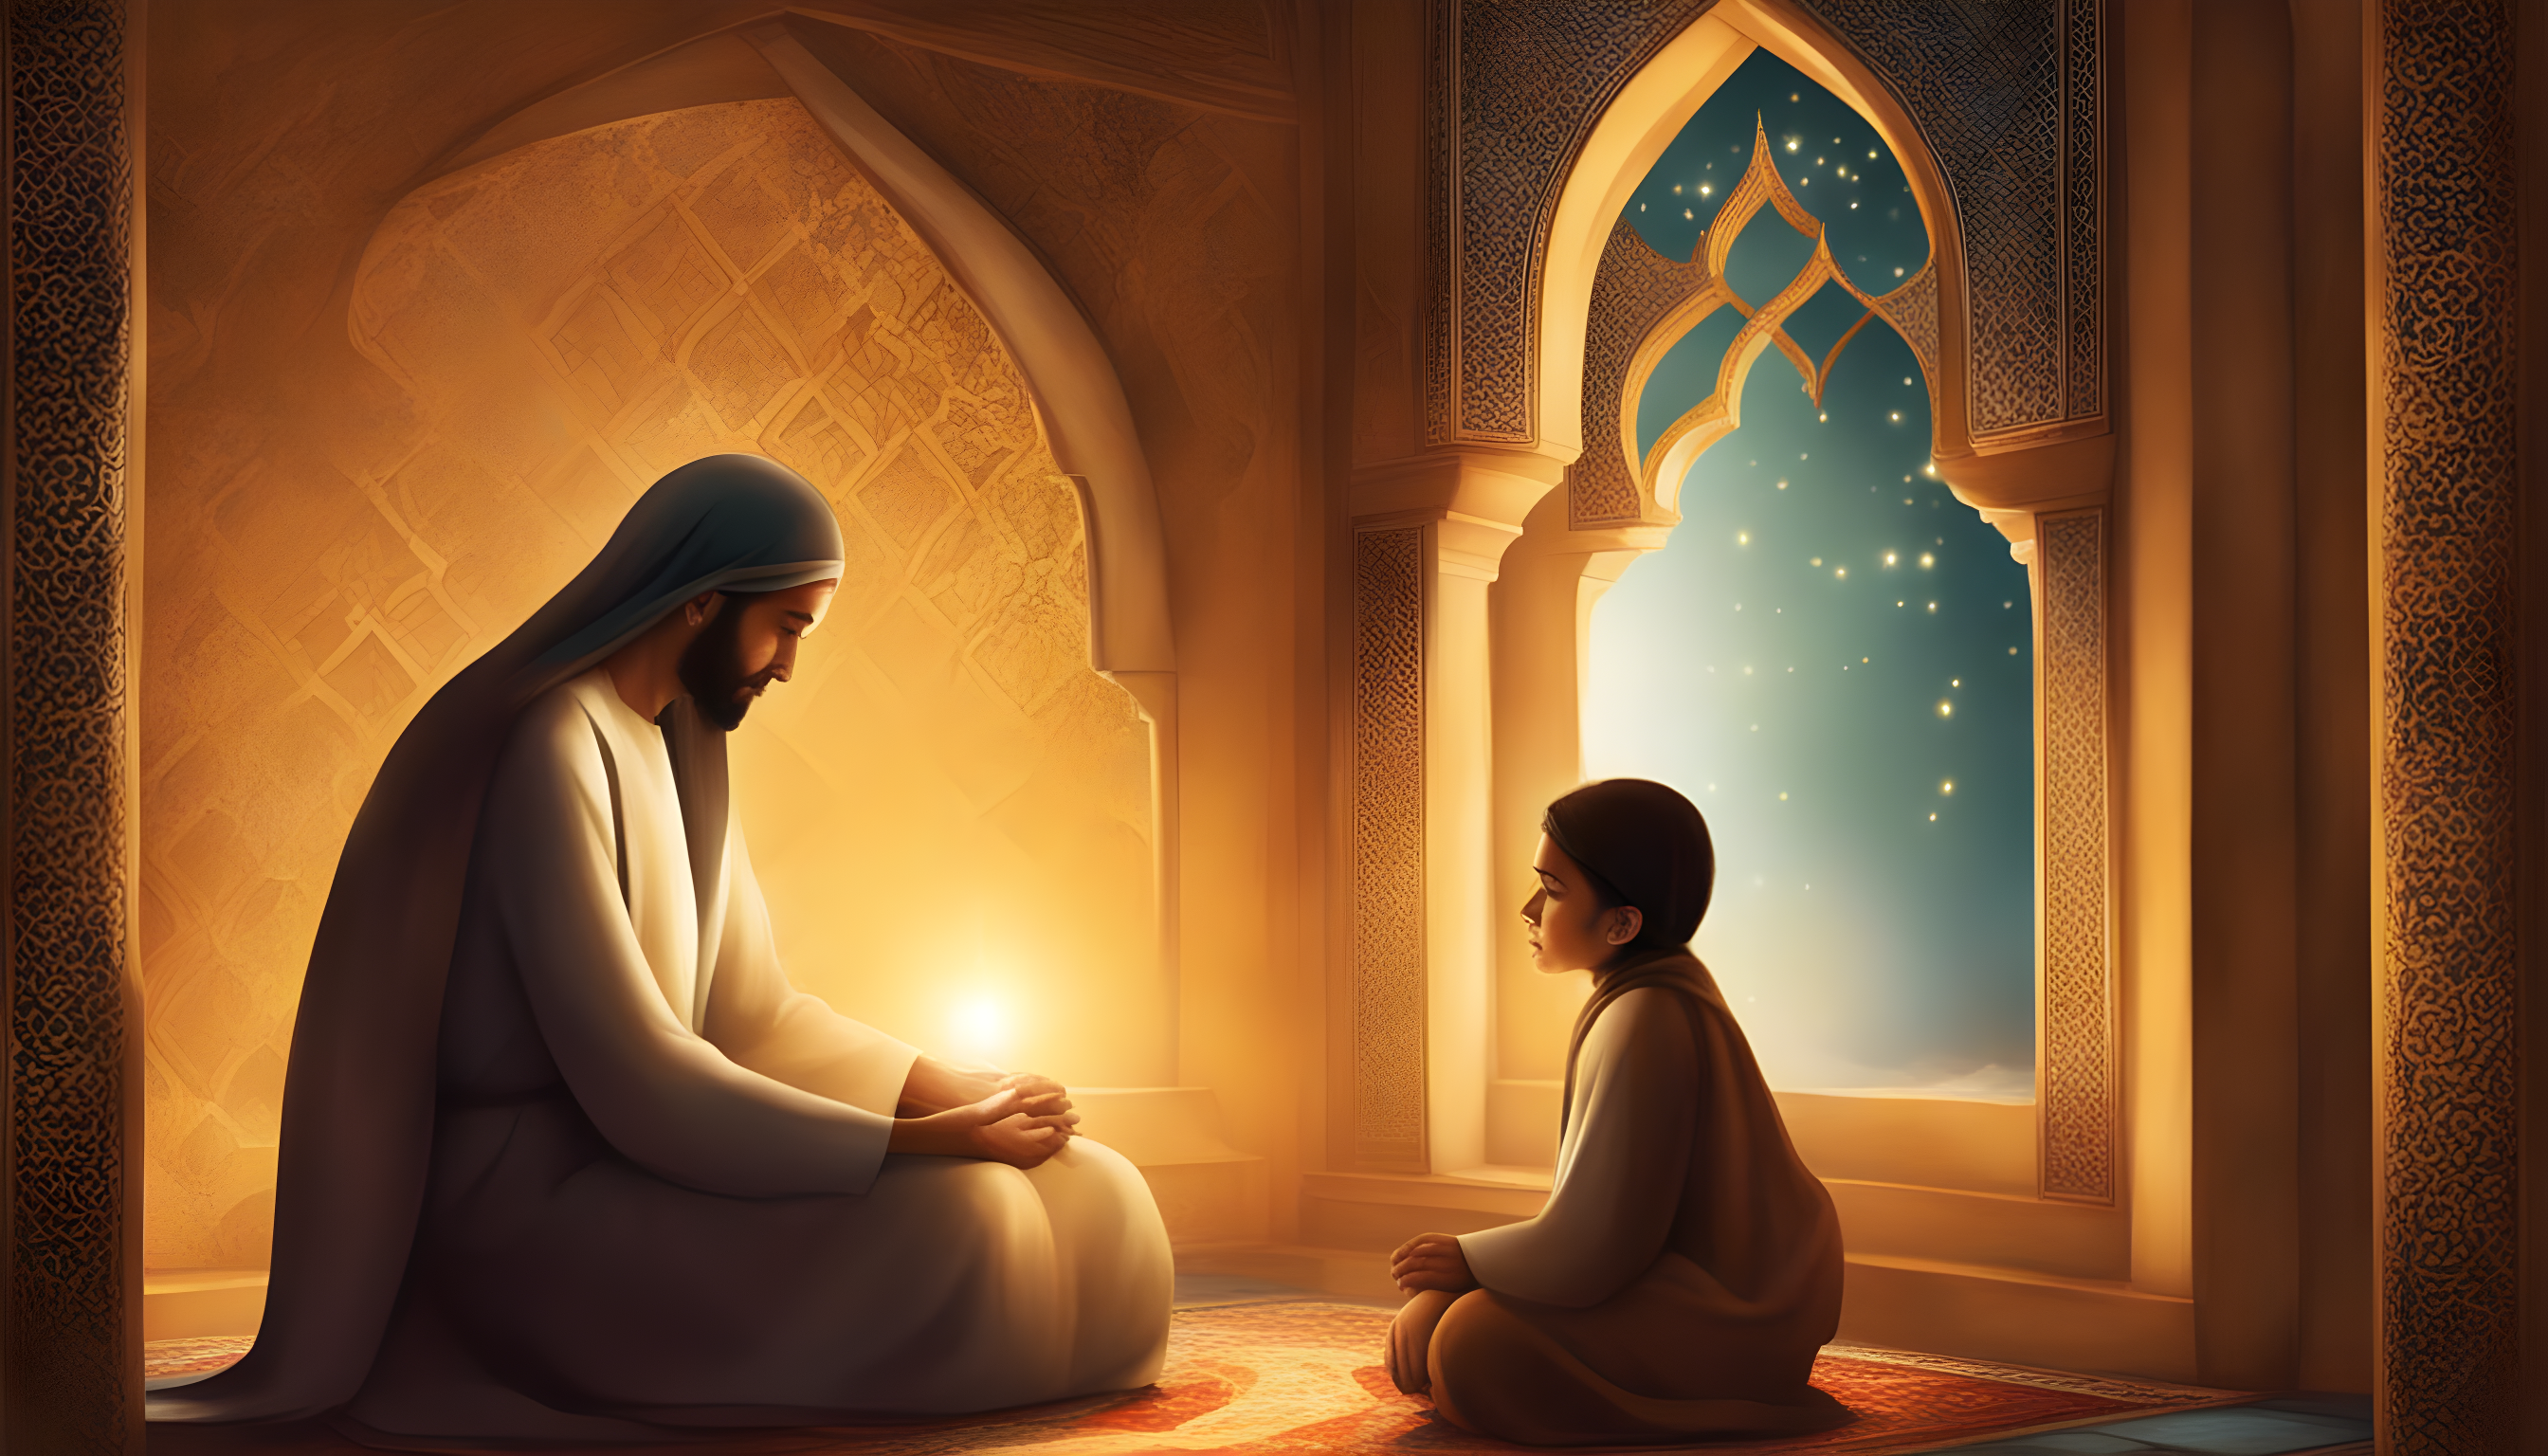 The Gift of Forgiveness – An Islamic Tale of Compassion